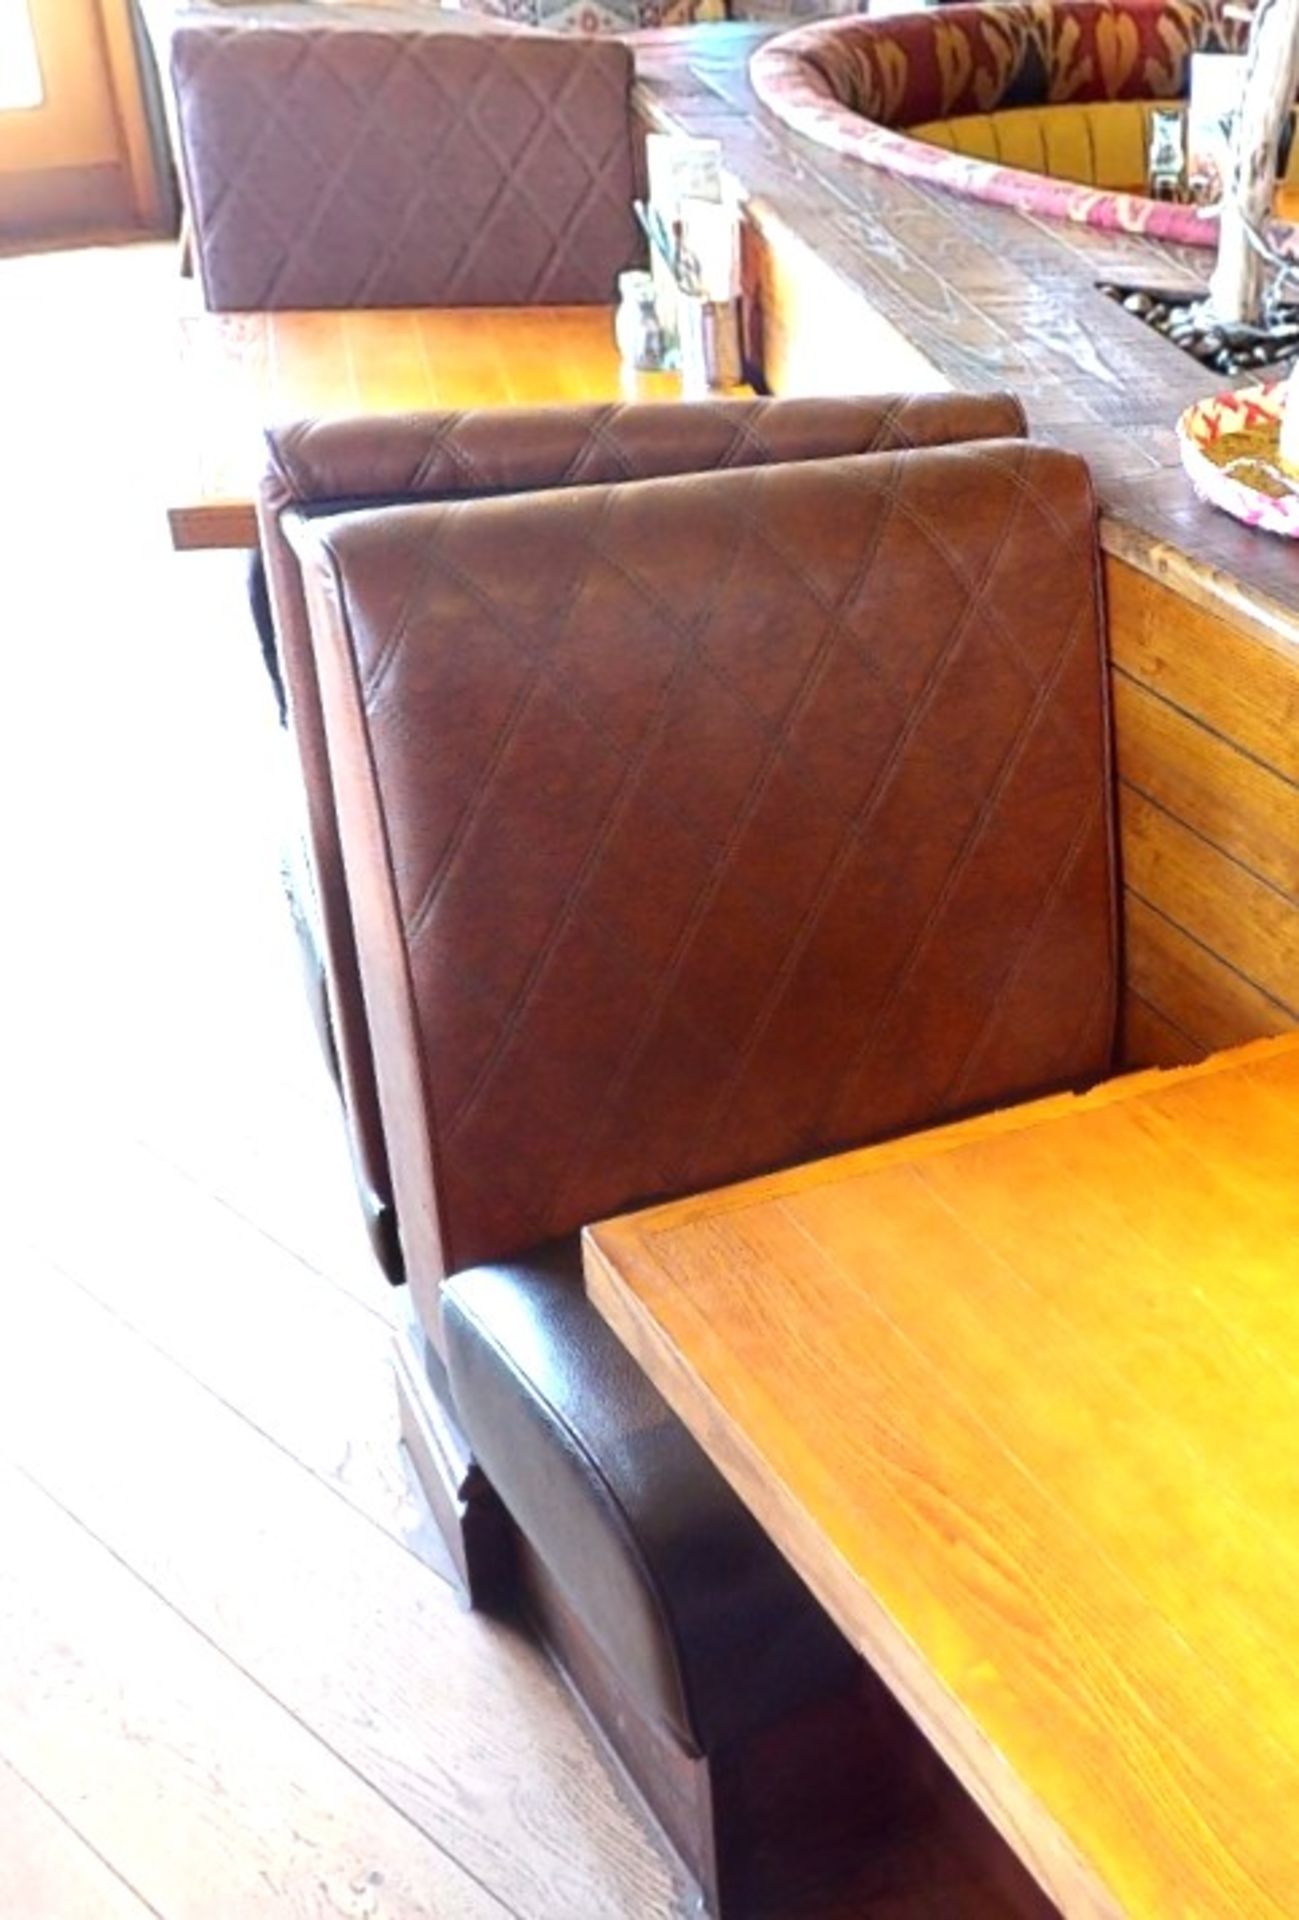 1 x Collection of Restaurant Single Seat Seating Benches - Includes 2 x End Benches and 3 x Back - Image 3 of 8